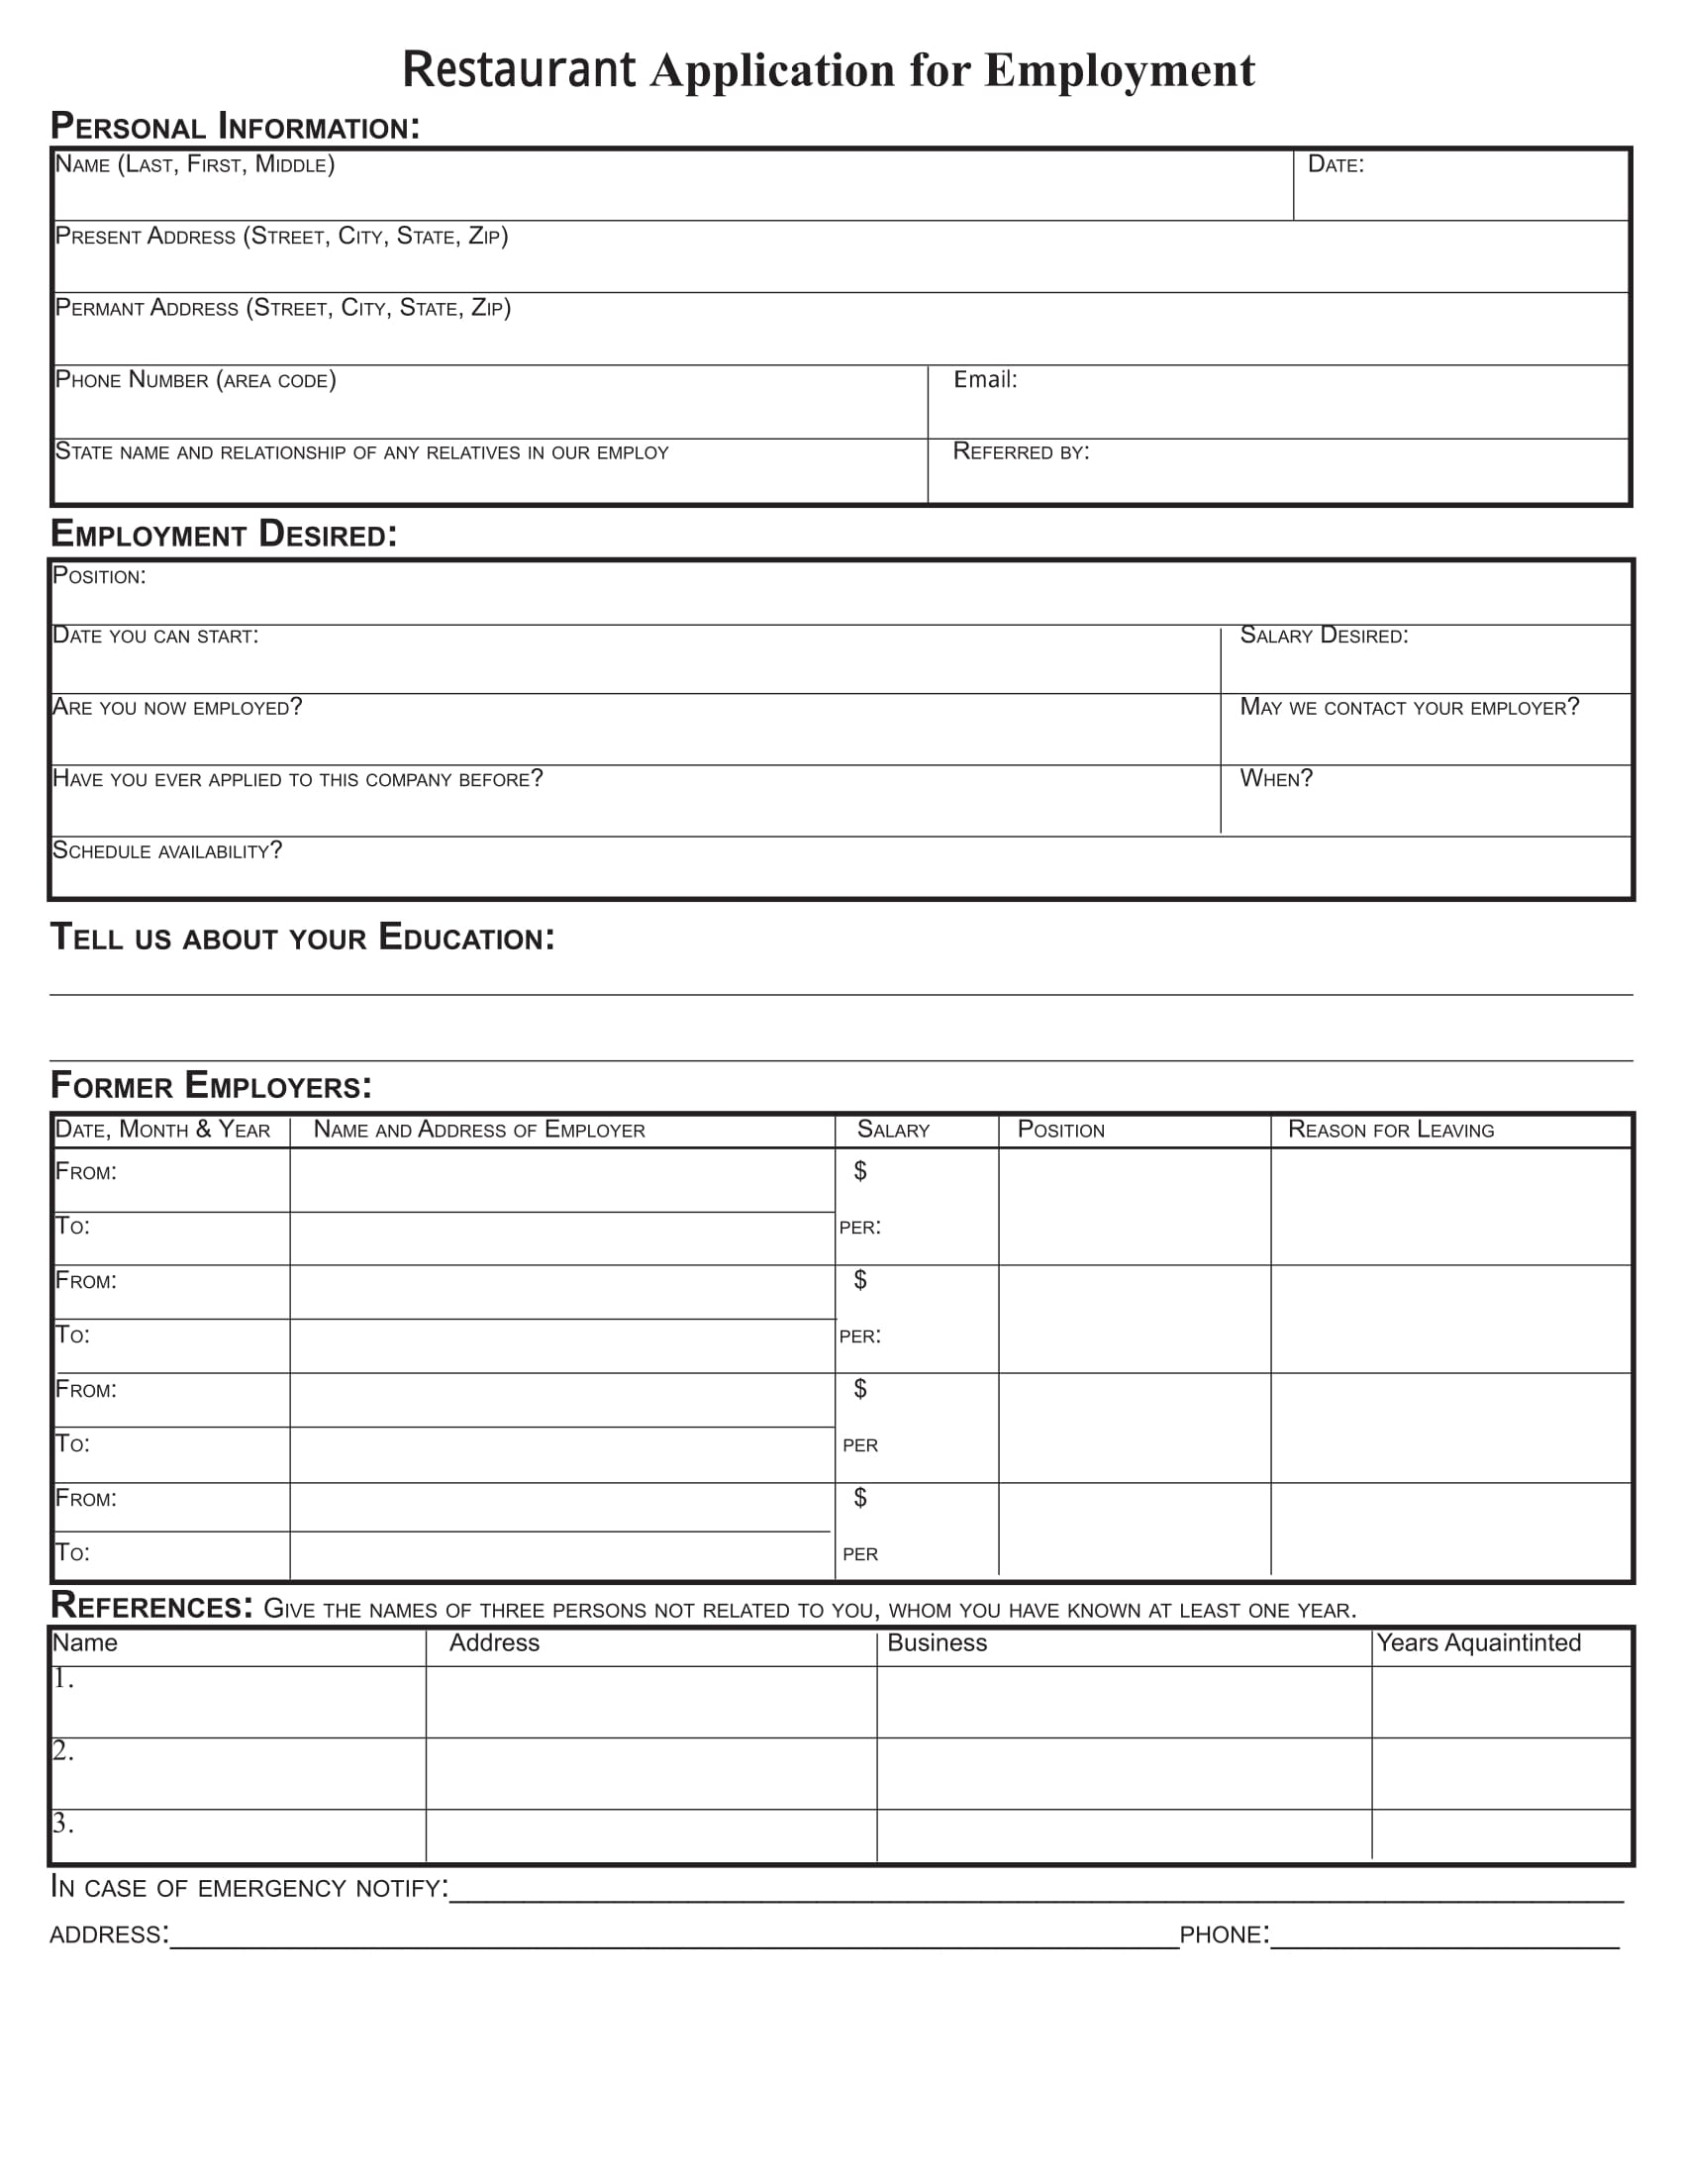 Free 8+ Restaurant Application Forms In Pdf | Ms Word For Employment Application Template Microsoft Word